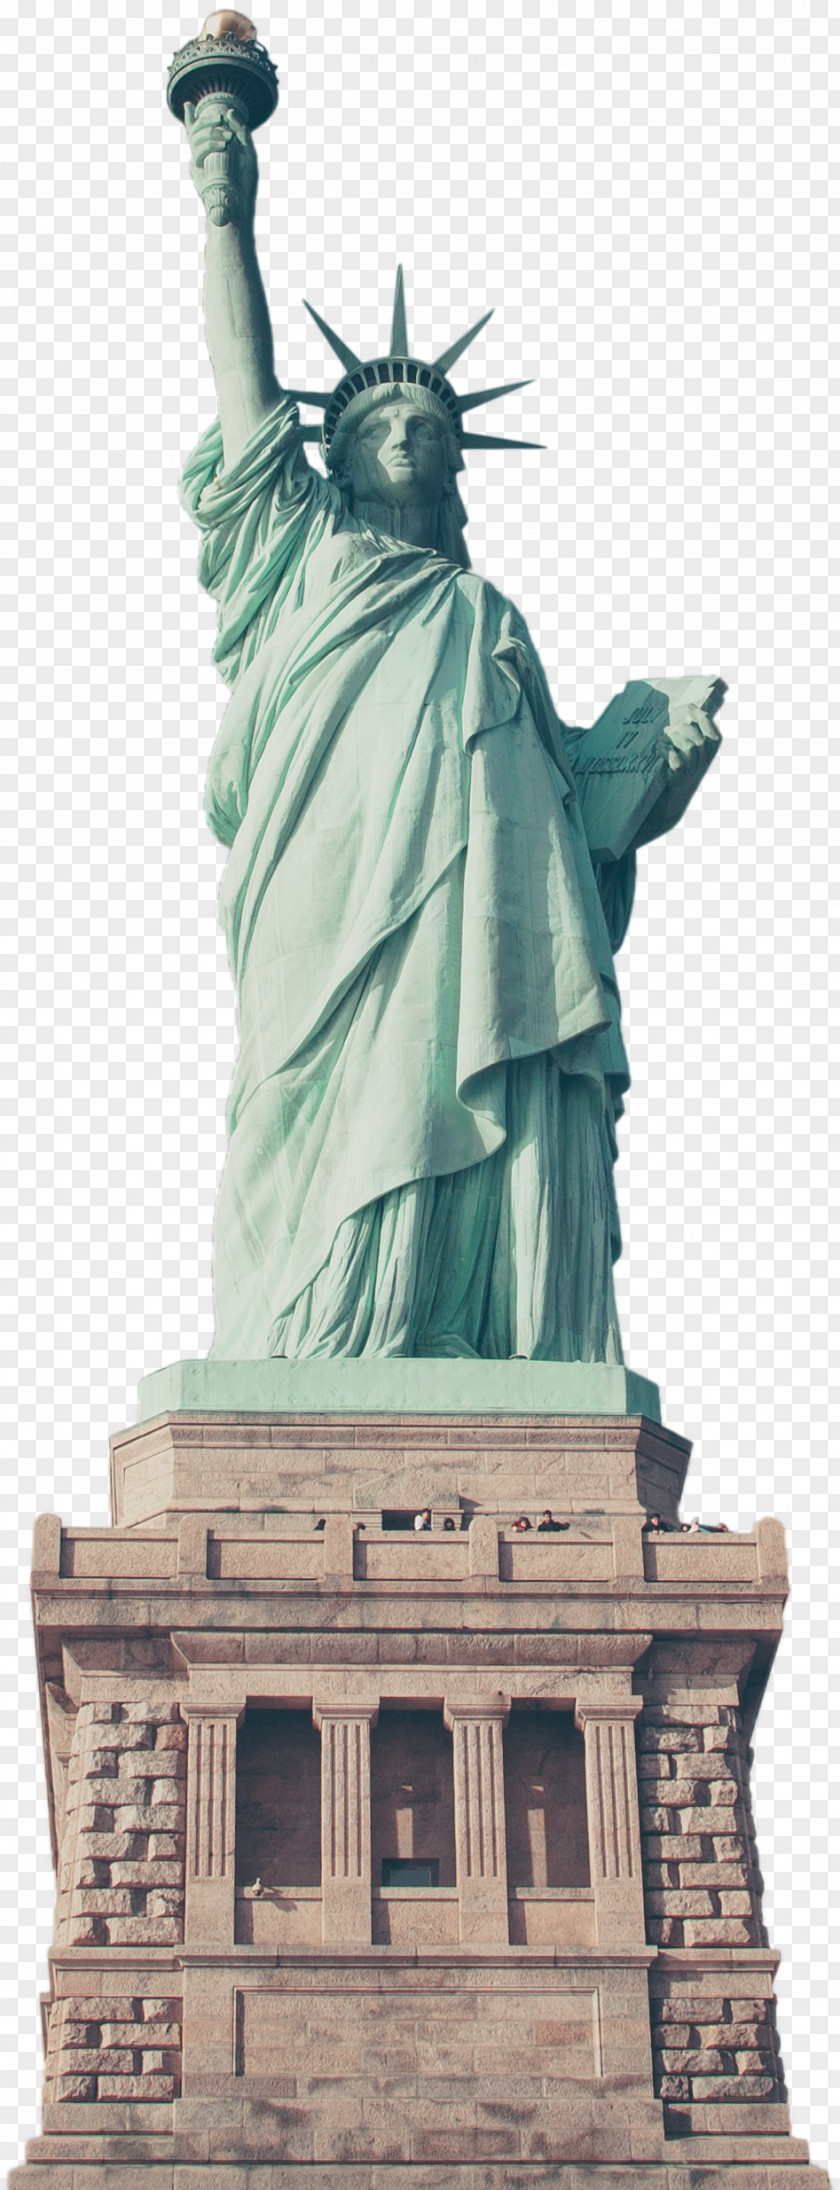 Statue Of Liberty Transparent National Monument Park Service PNG